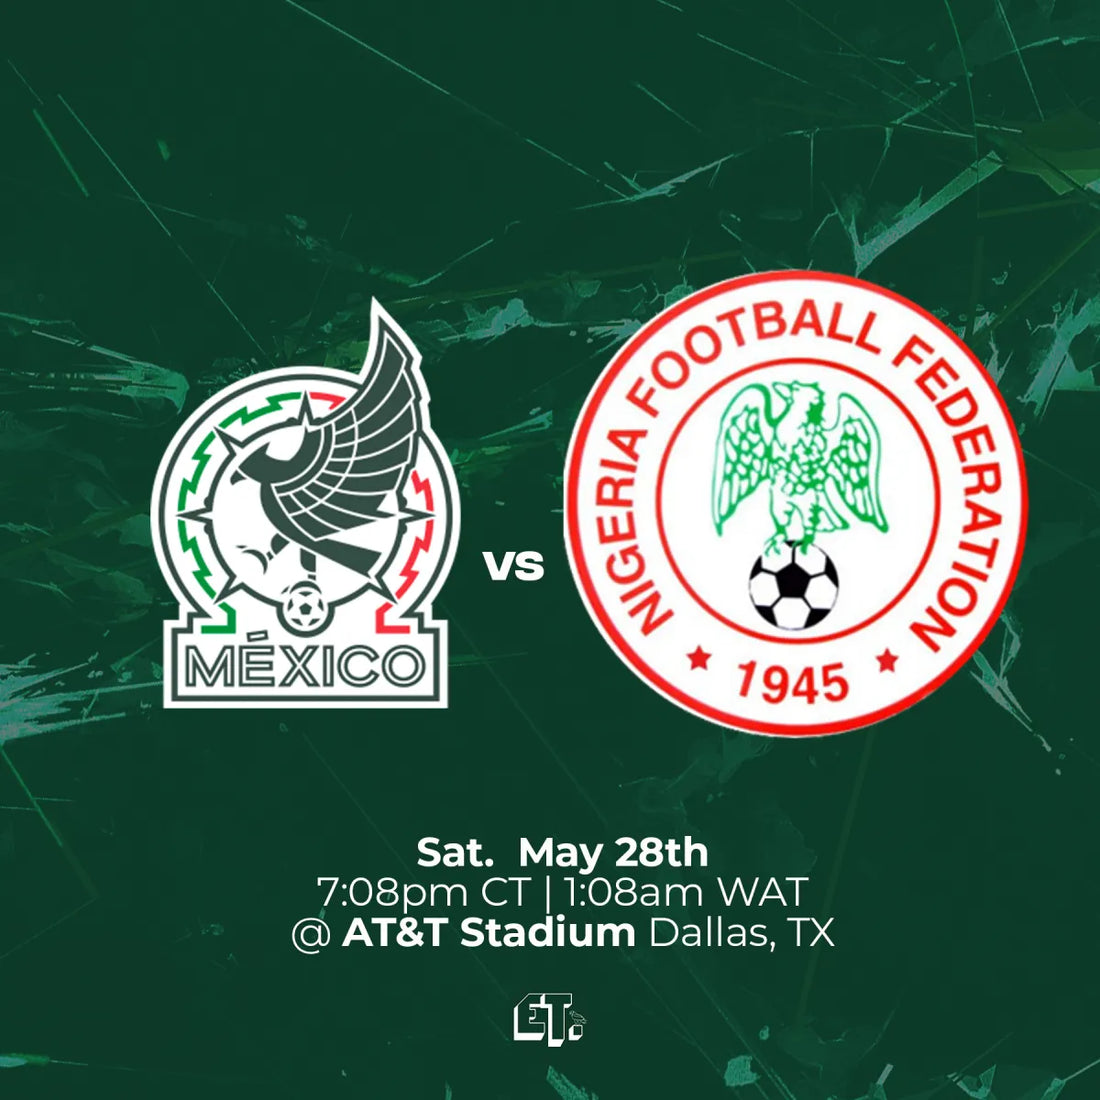 Super Eagles of Nigeria to play Mexico in America